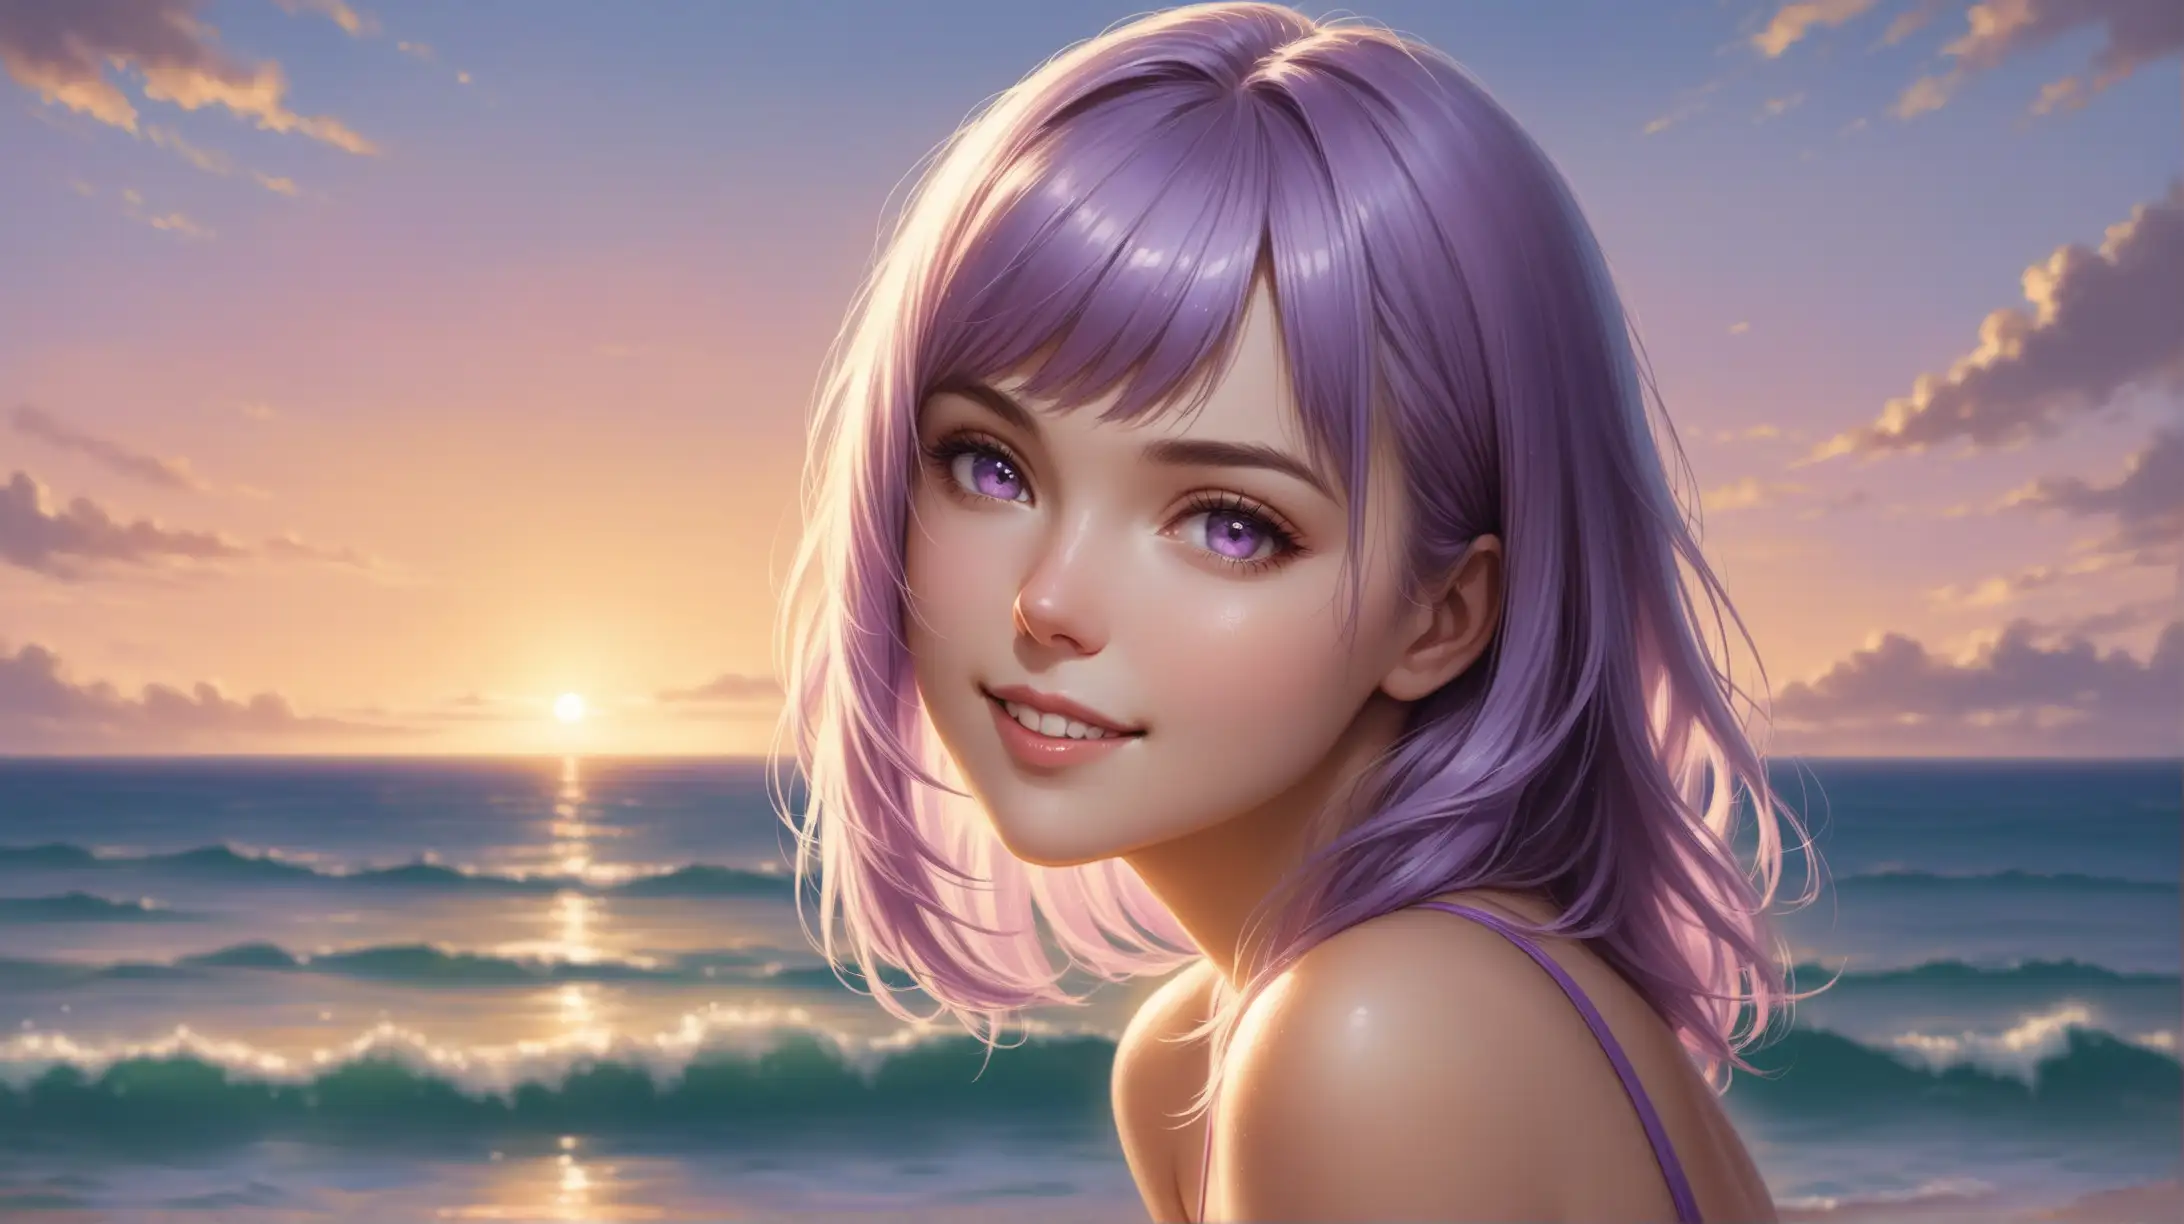 Seductive Woman with Light Purple Hair in Swimsuit Outdoors